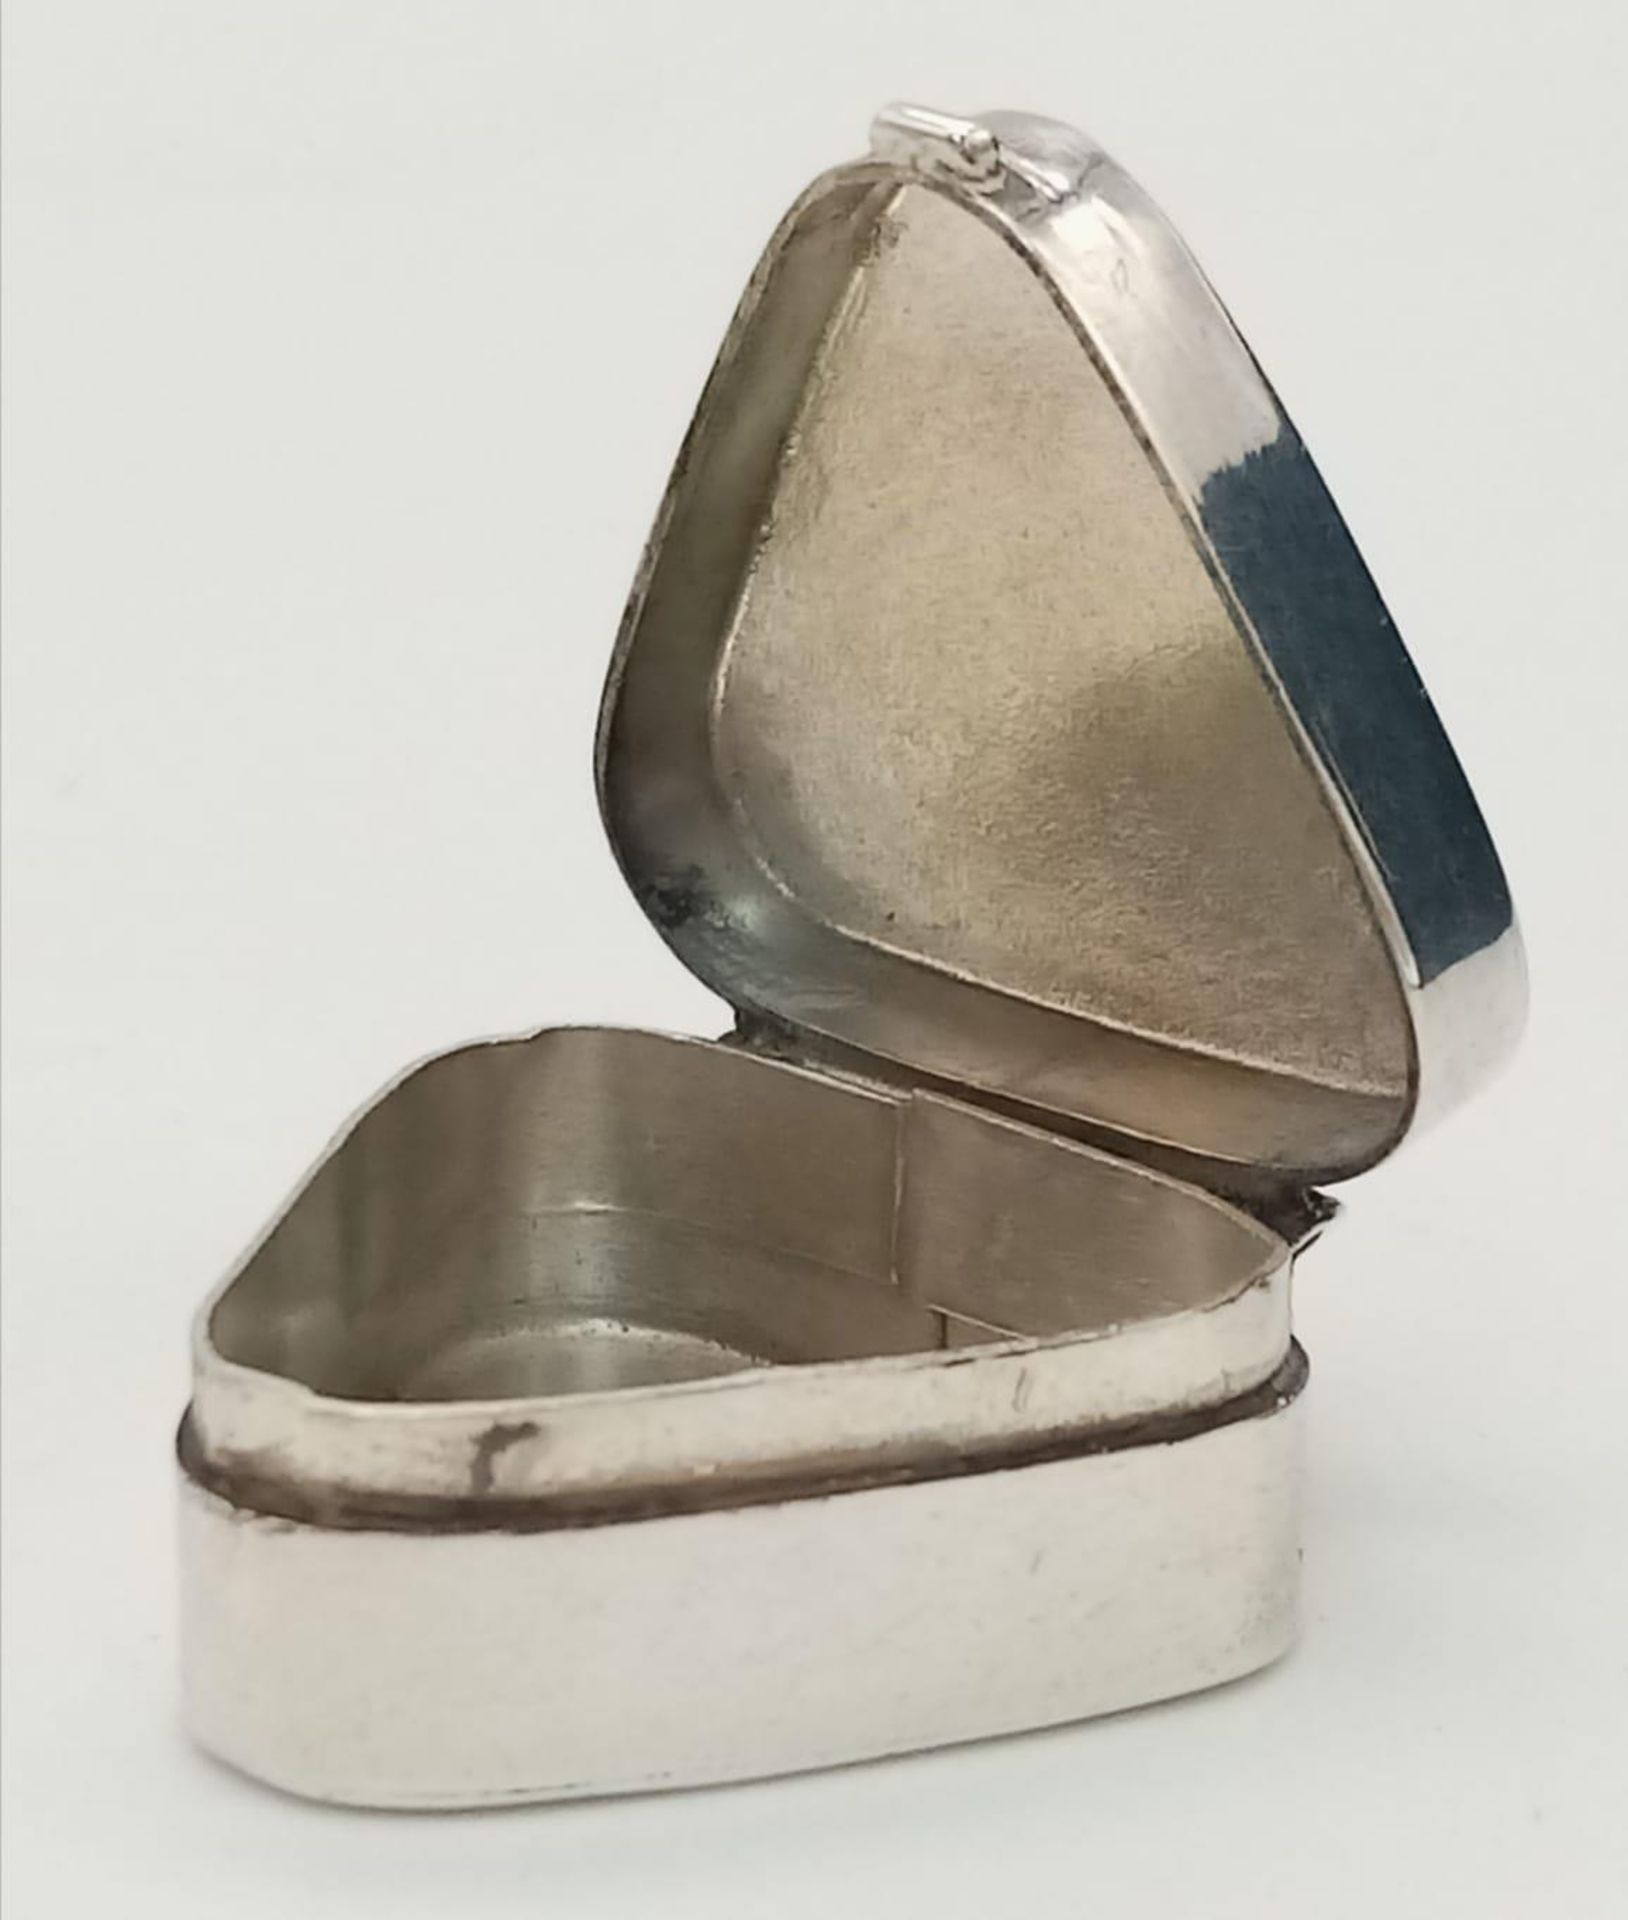 A TRIANGULAR STERLING SILVER TRINKLET BOX/PILL BOX, NICELY ENGRAVED ON TOP, WEIGHT 7.1G - Image 6 of 11